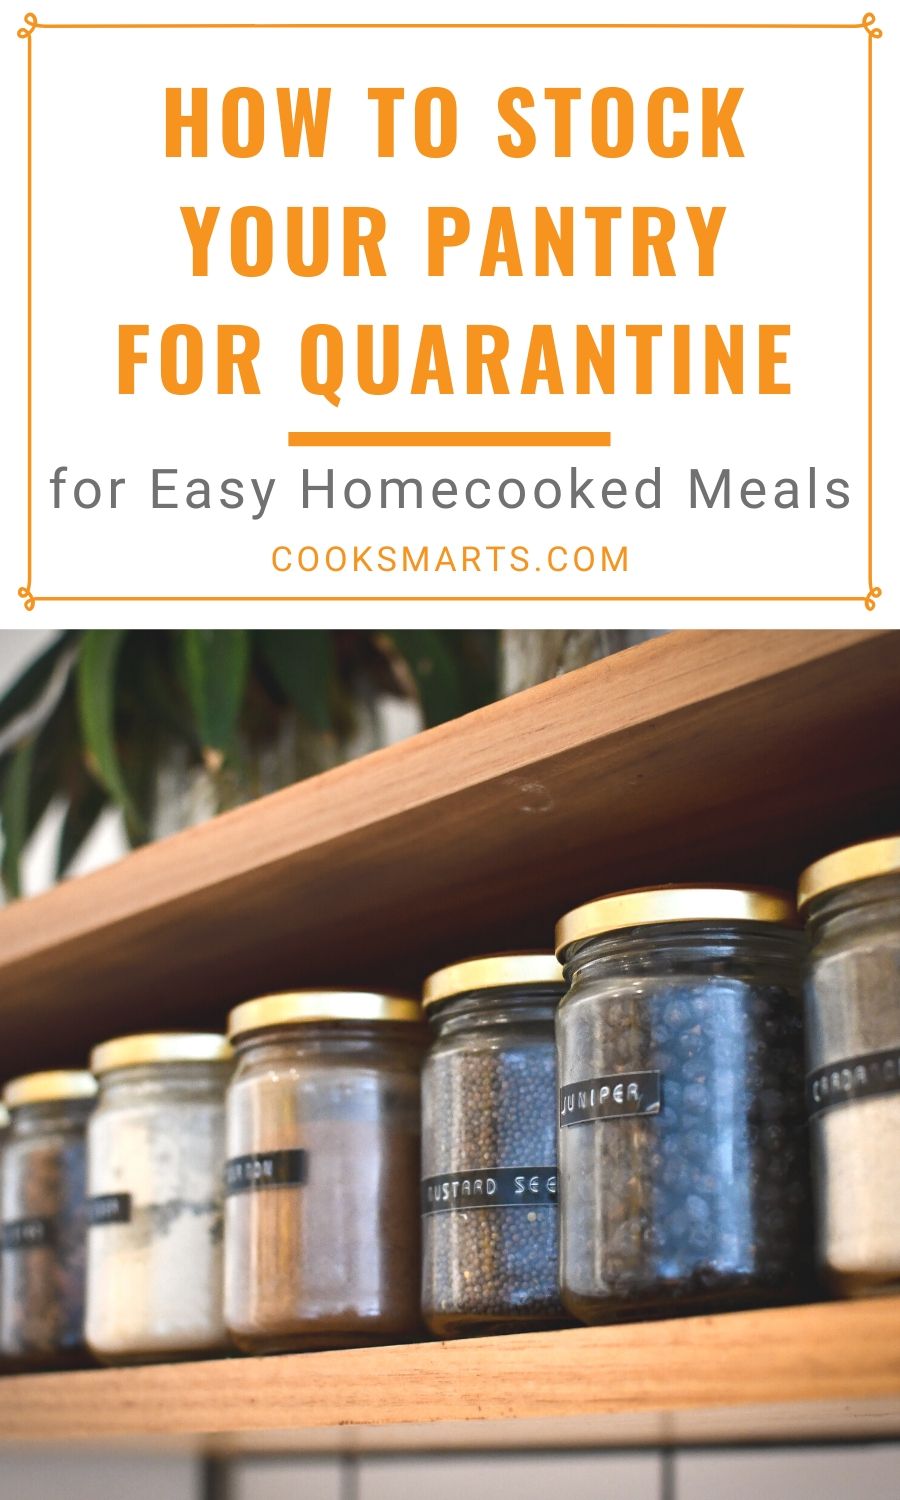 Healthy Pantry Essentials to Stock Up On | Cook Smarts